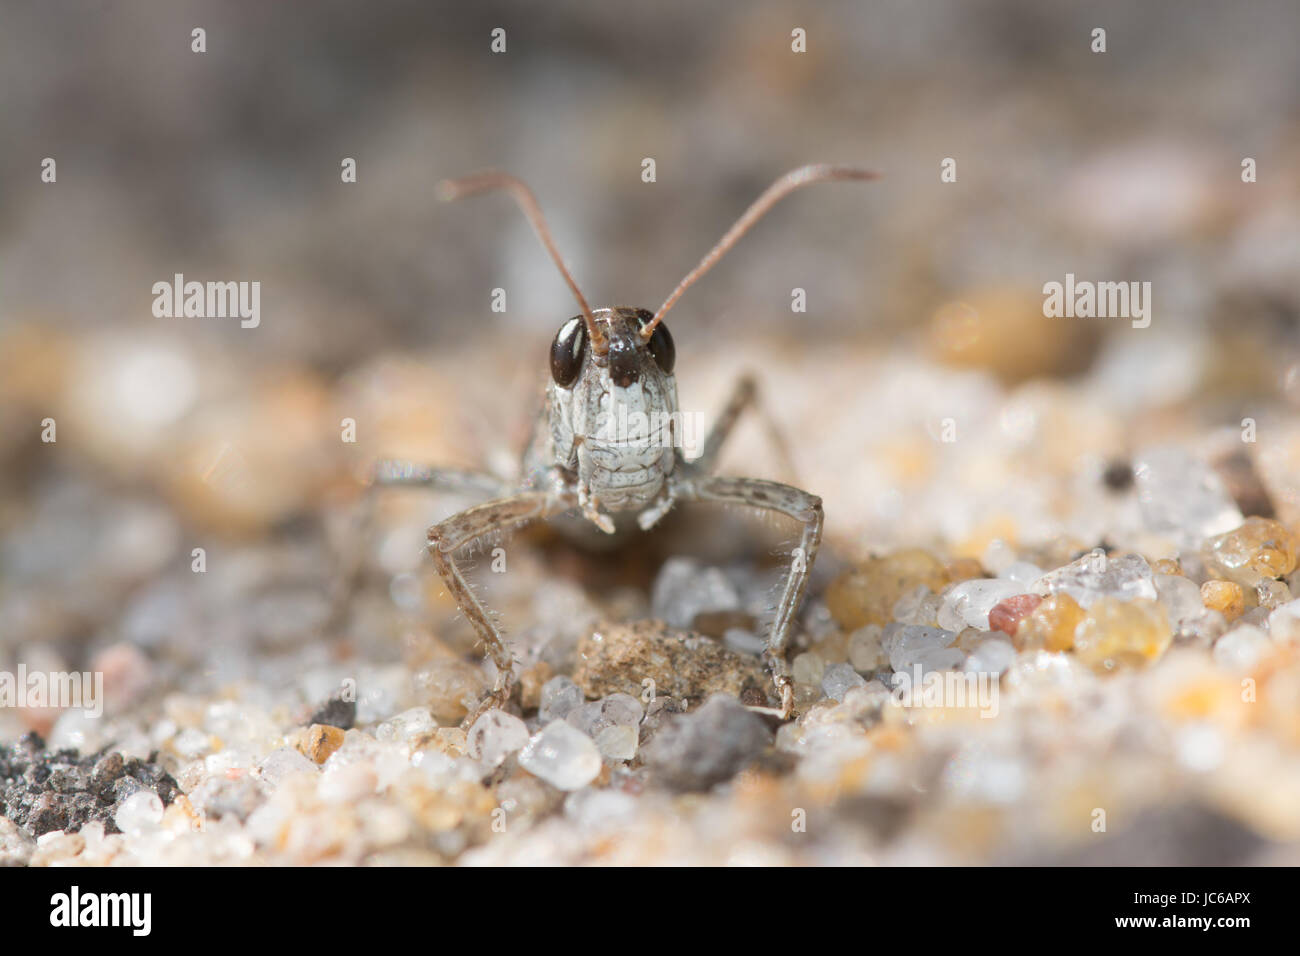 Close-up of grasshopper on sand Stock Photo